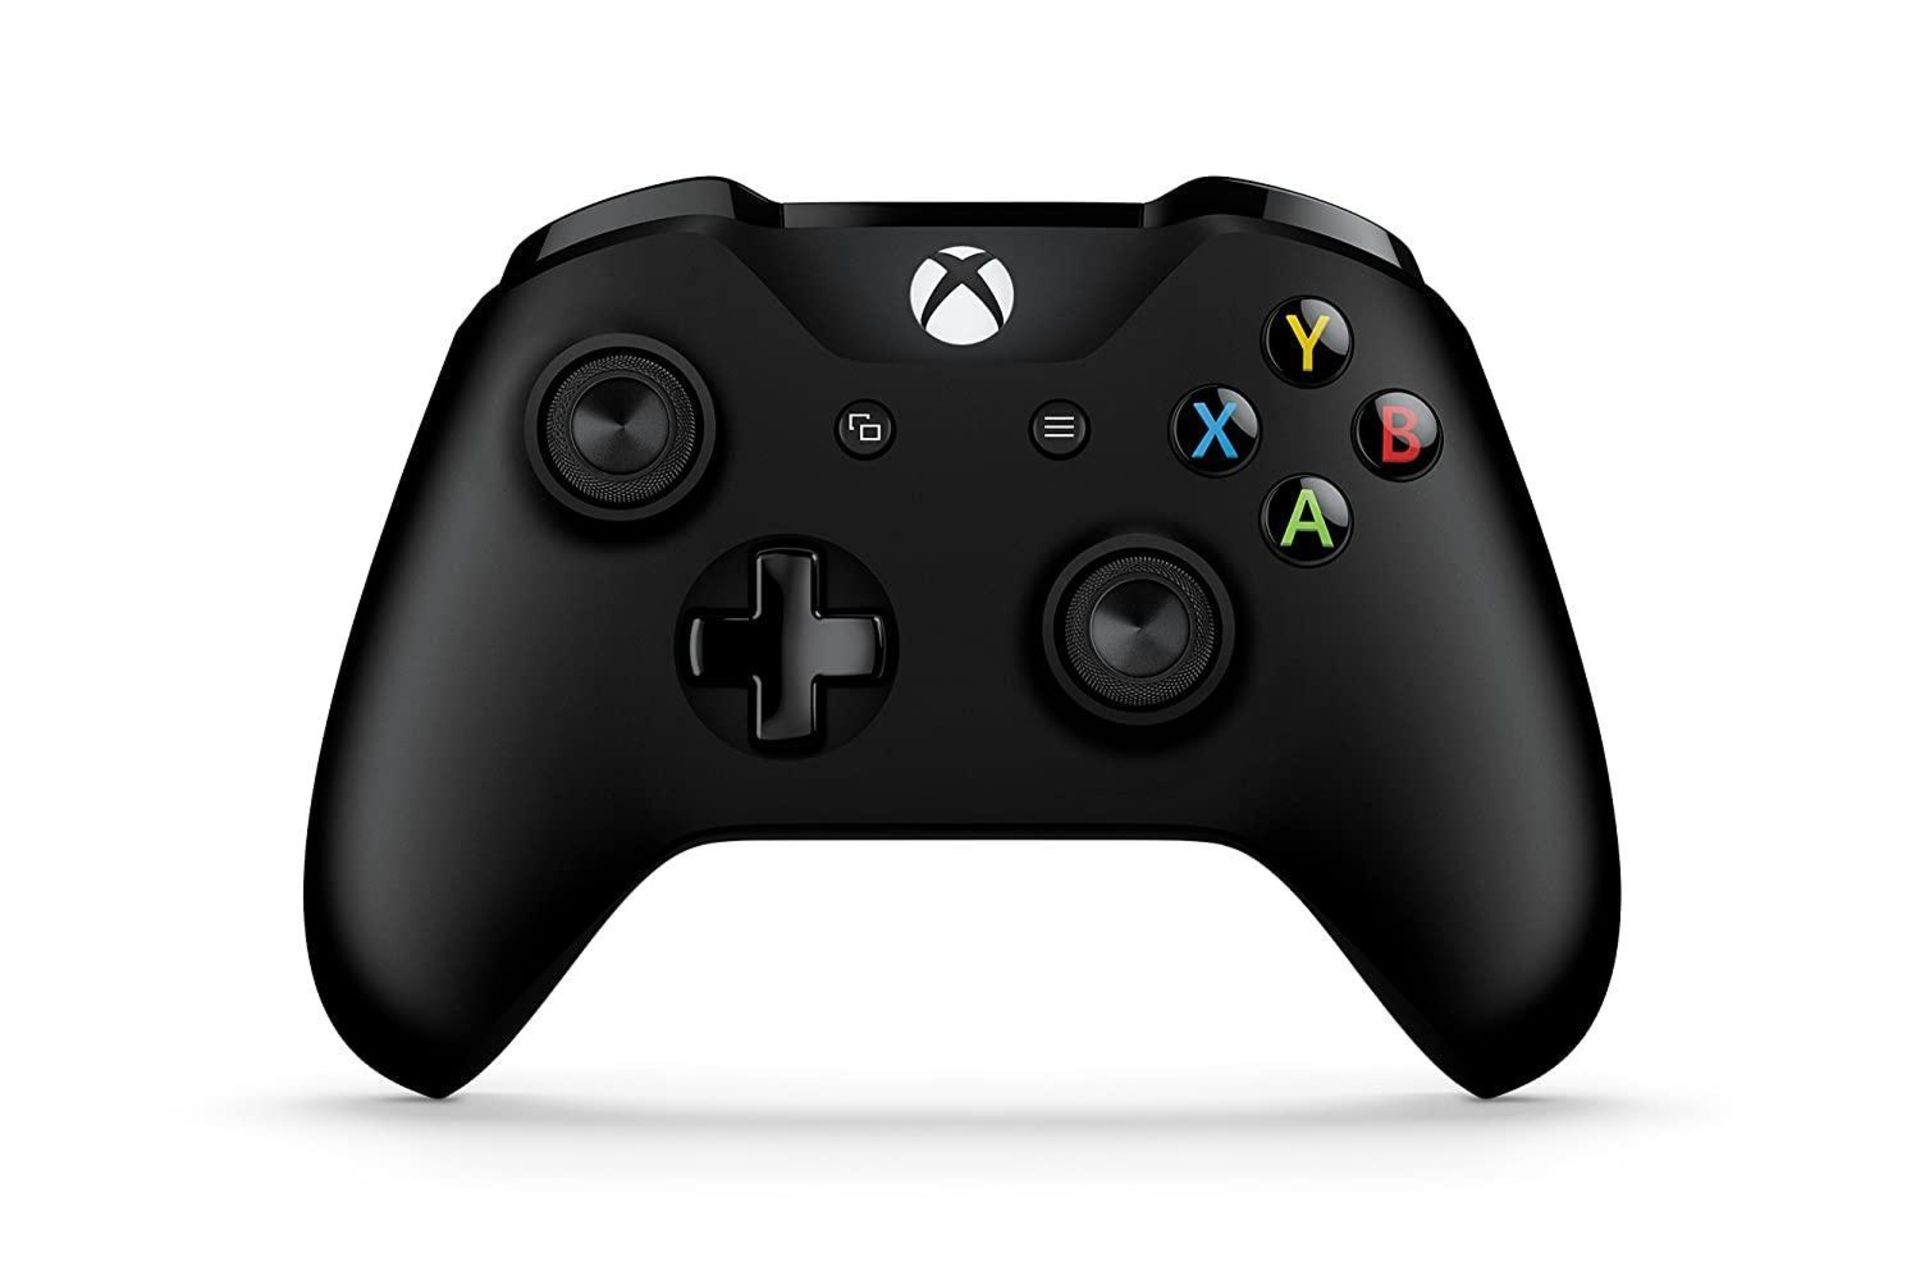 Official Xbox One Wireless Controller 3.5mm - Black, £49.99 RRP